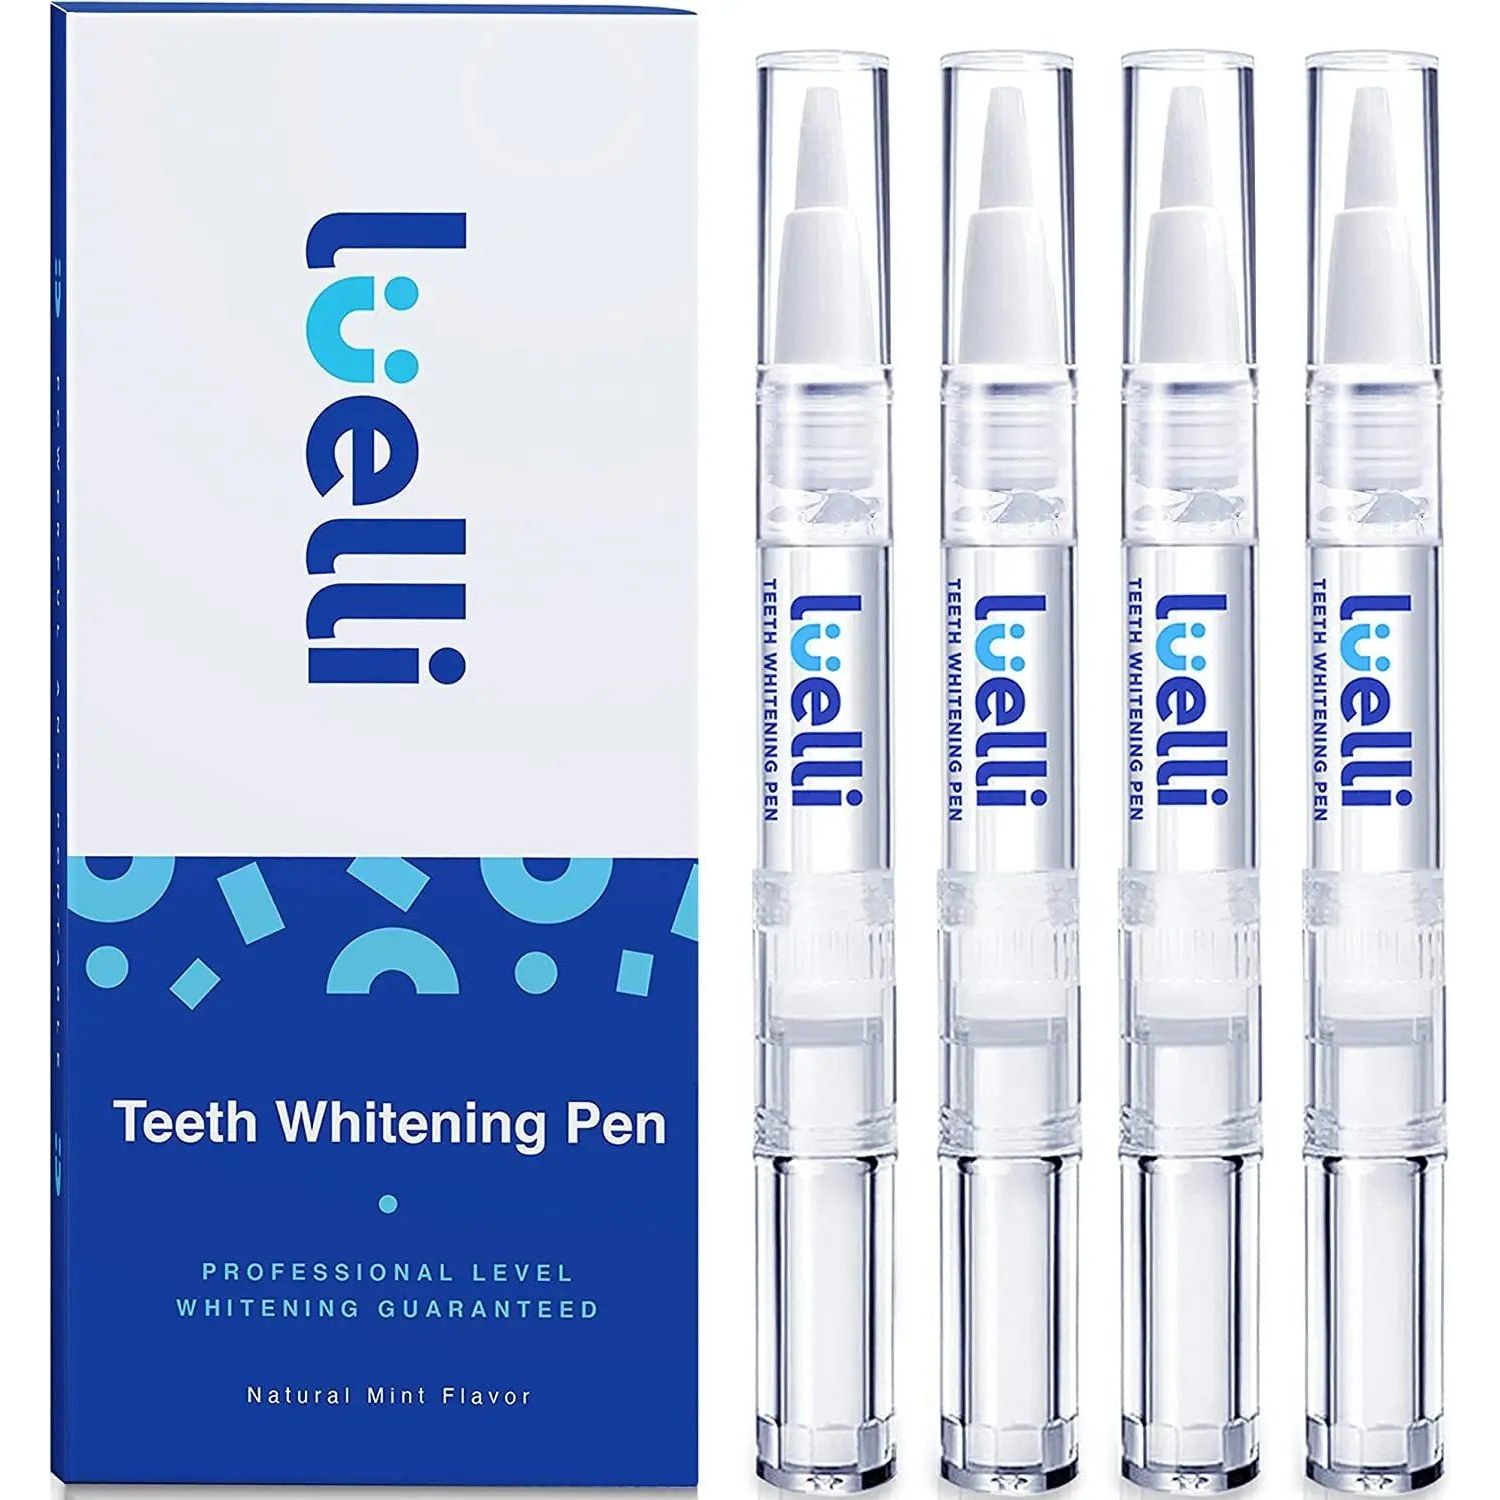 LUELLI Professional Teeth Whitening Pen for a White Smile - 4 Tooth Stain Remover Gel Pens with 35% Carbamide Peroxide - Home Dental Products for Sensitive Teeth